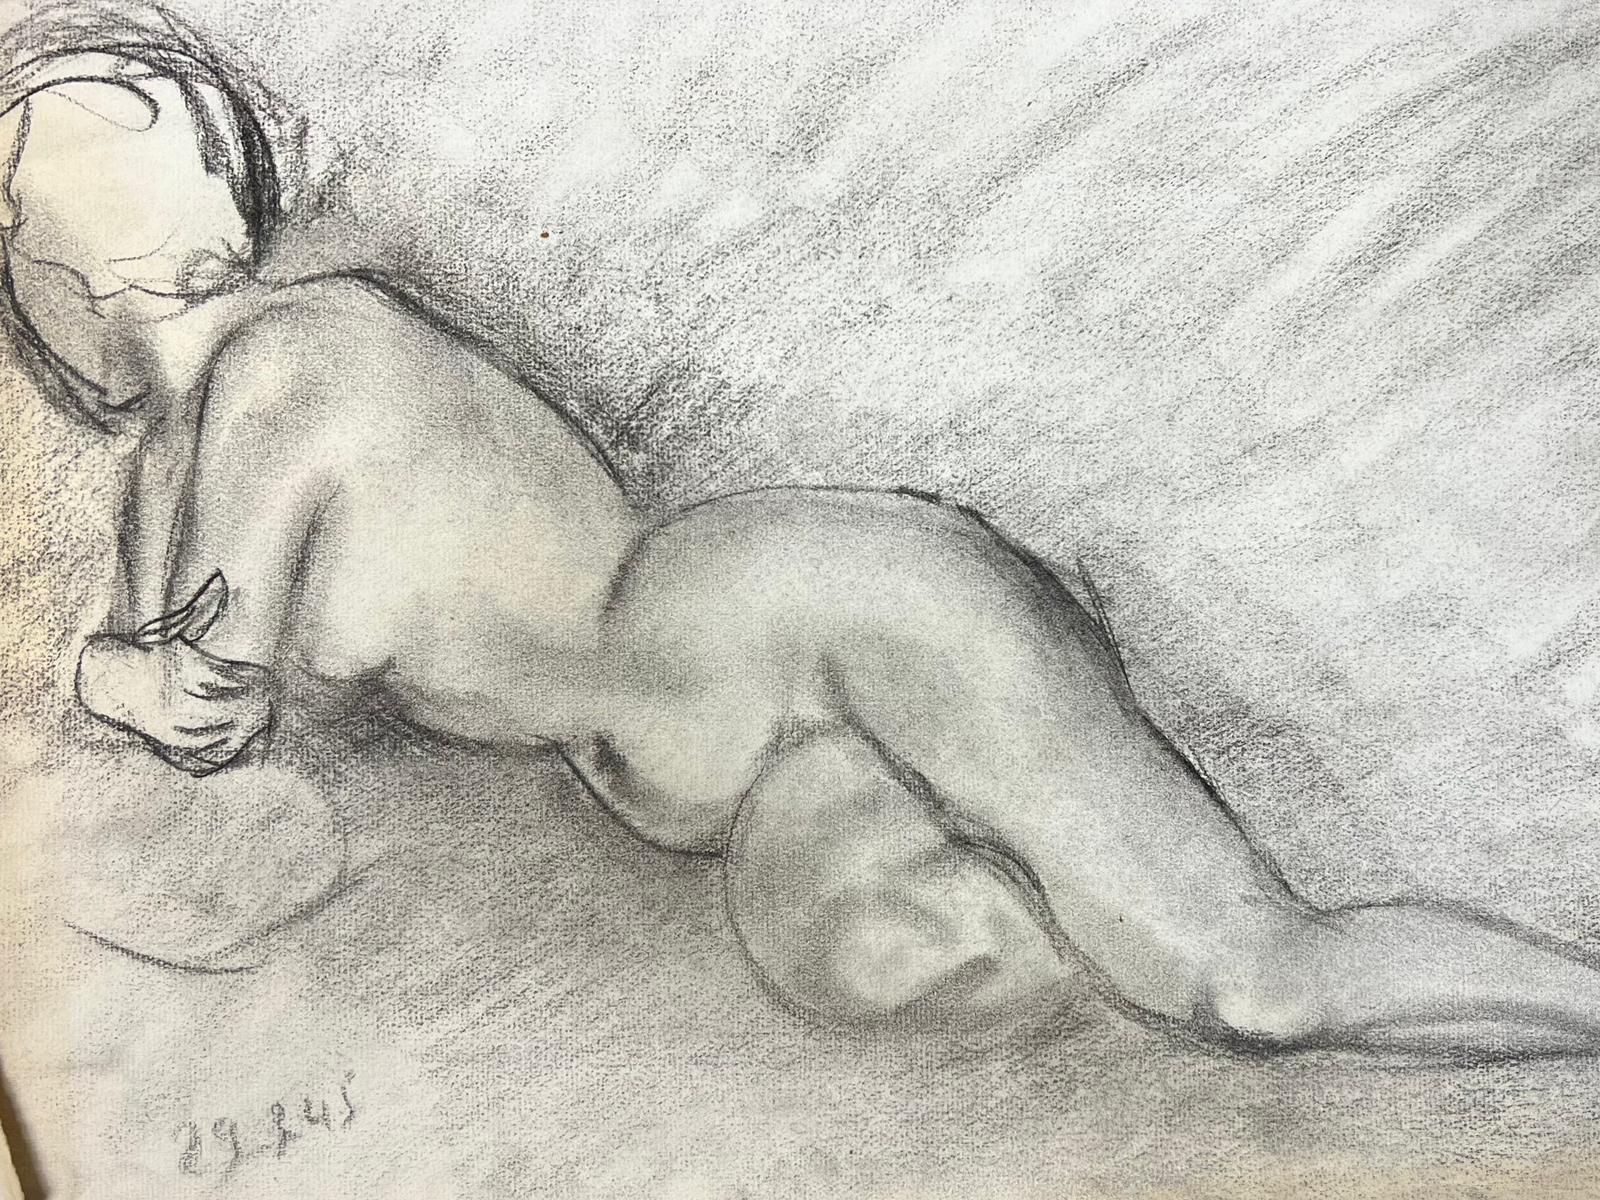 Nude Lady Drawing
by Geneviève Zondervan (French 1922-2013)
pencil/charcoal drawing on paper

paper: 12 x 19 inches

Superb mid-century oil painting on board by the French artist, Geneviève Zondervan (French 1922-2013). The painting has excellent